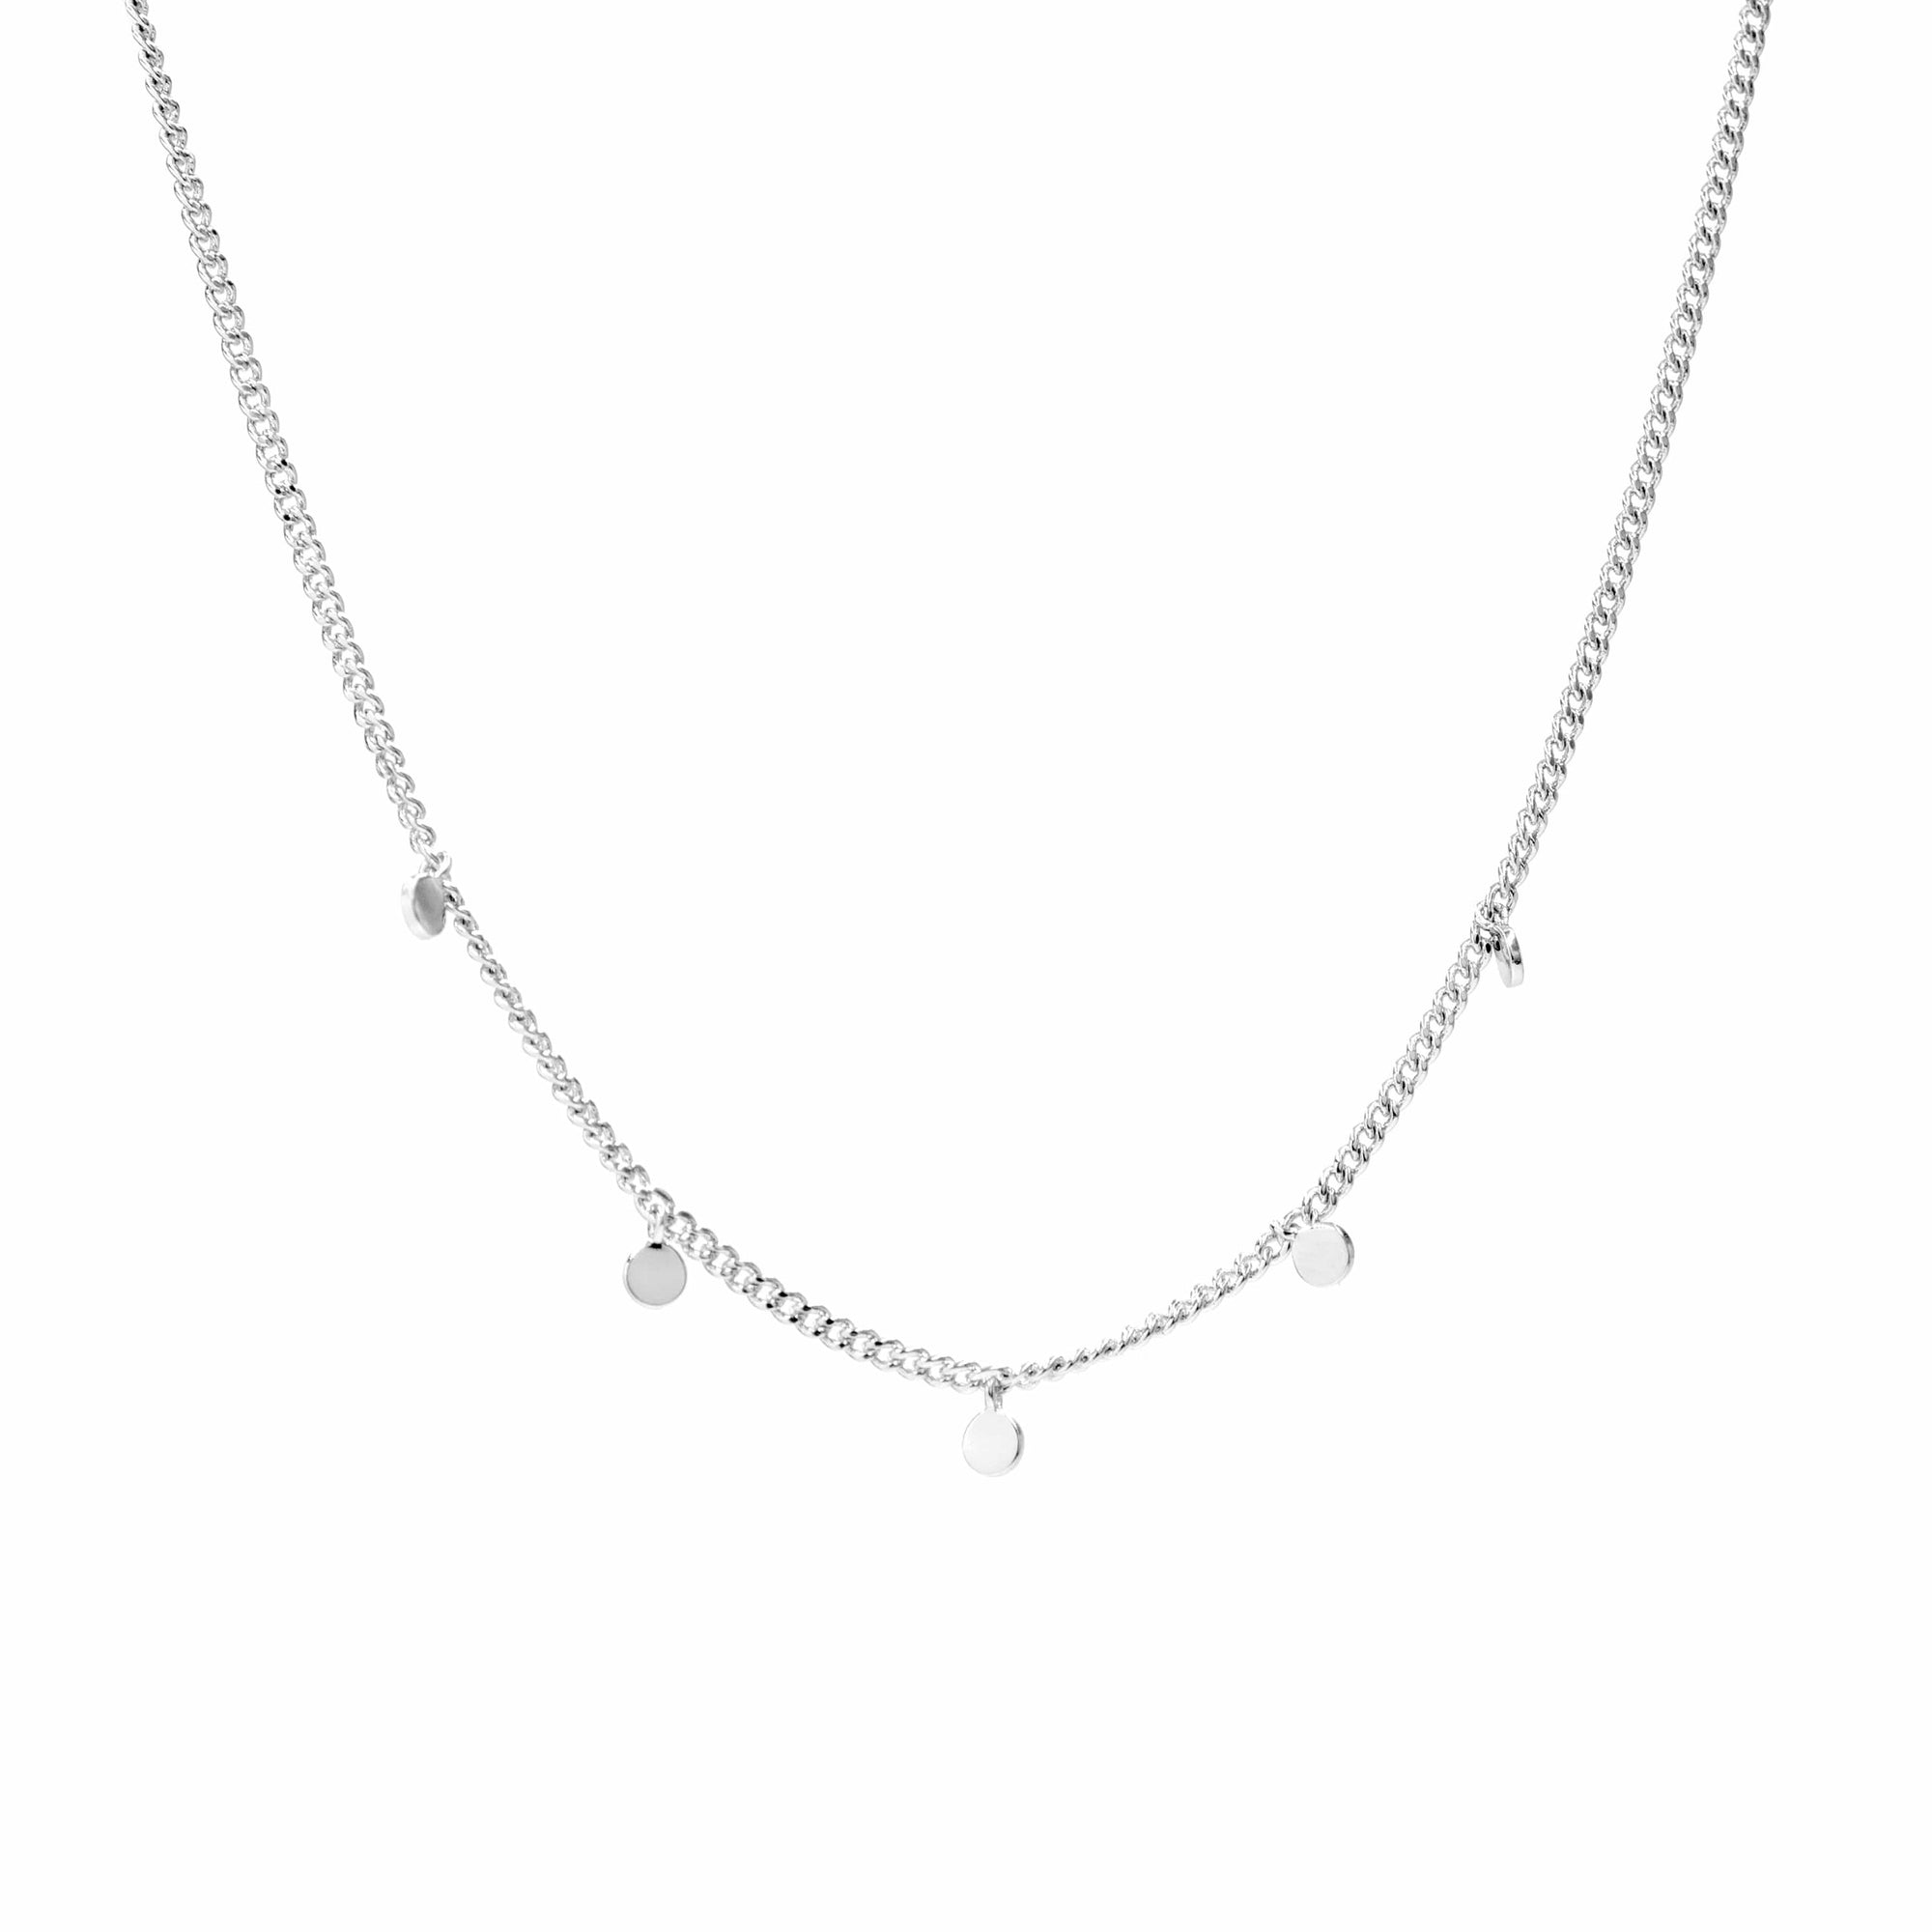 "Truffle" Necklace in Silver